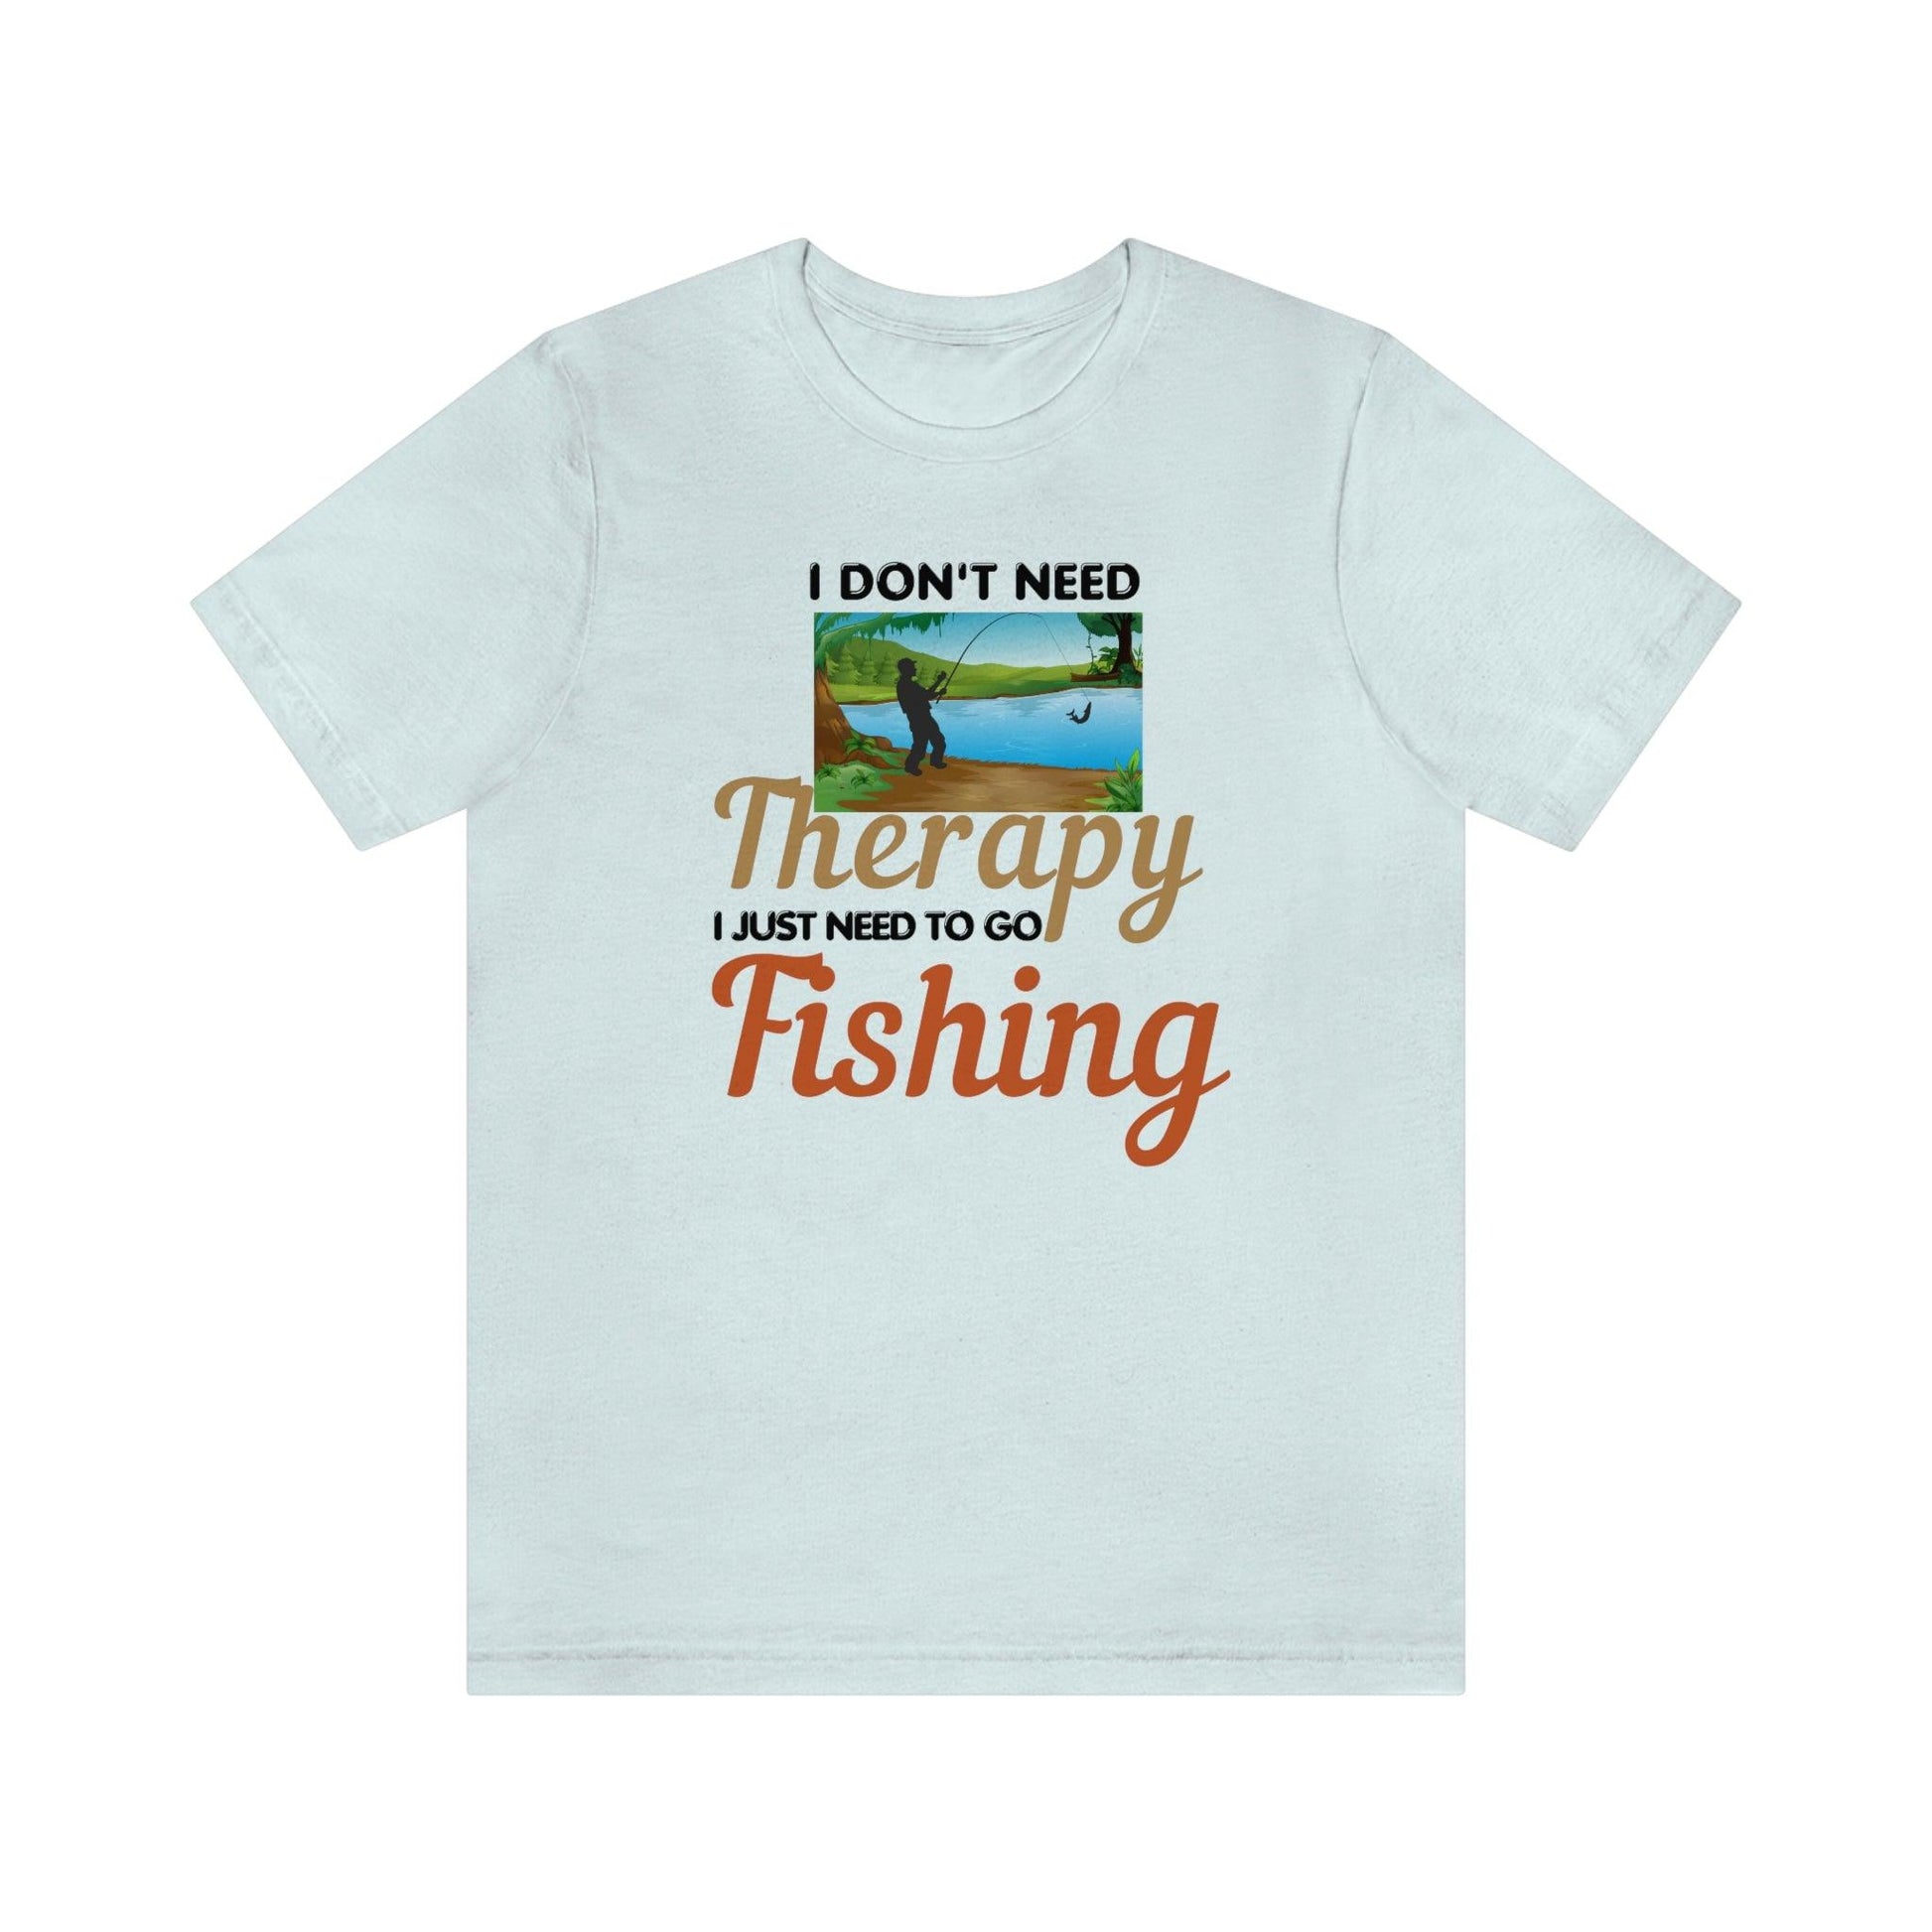 Fishing T-shirt dad shirt dad gift outdoor lover gift - fishing gift nature lover shirt I don't need therapy I just need to go Fishing shirt - Giftsmojo